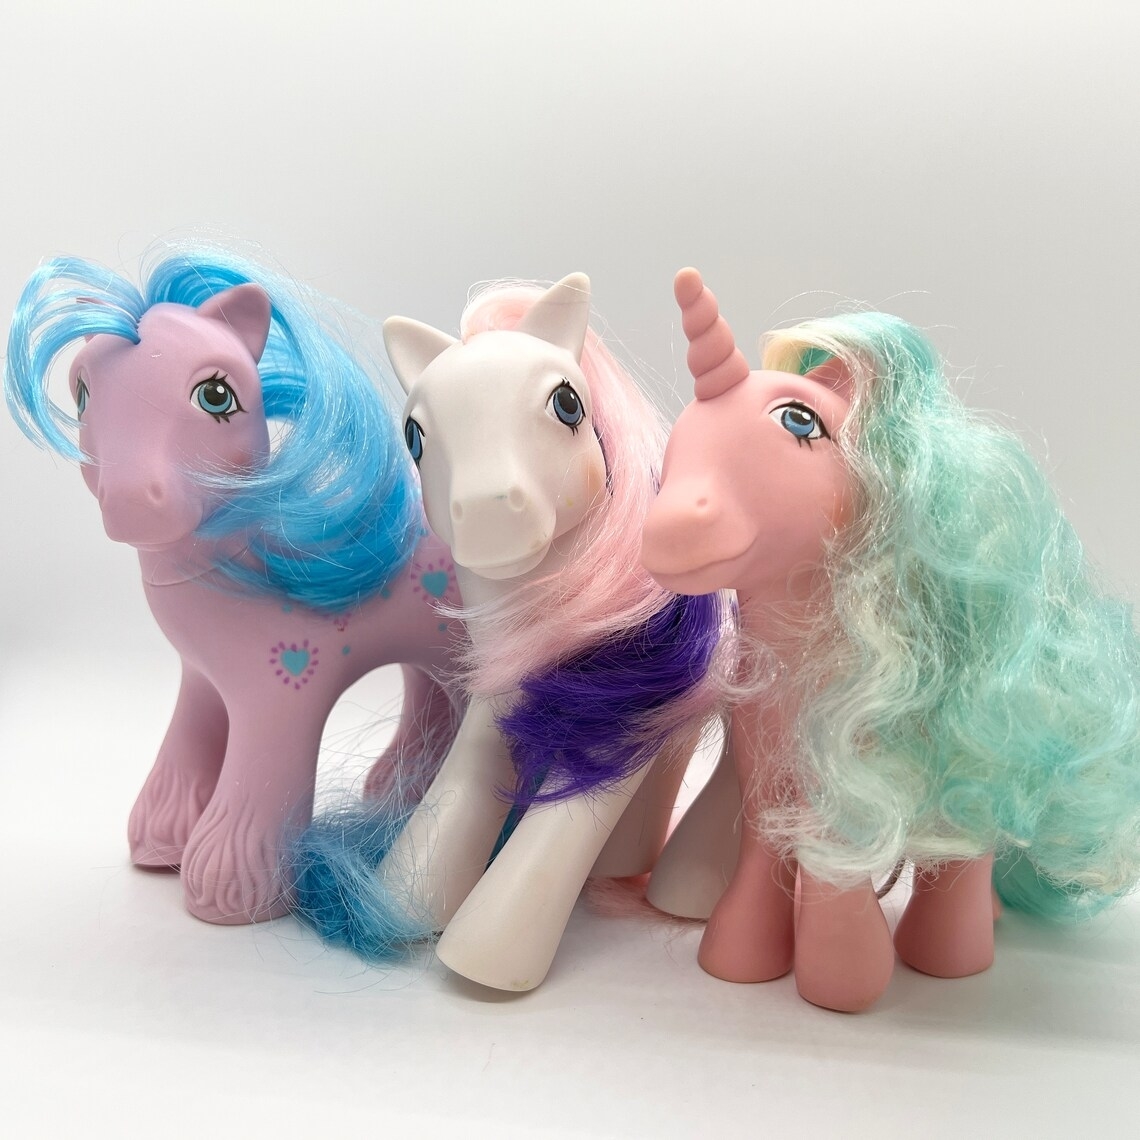 Three vintage My Little Pony figures standing together